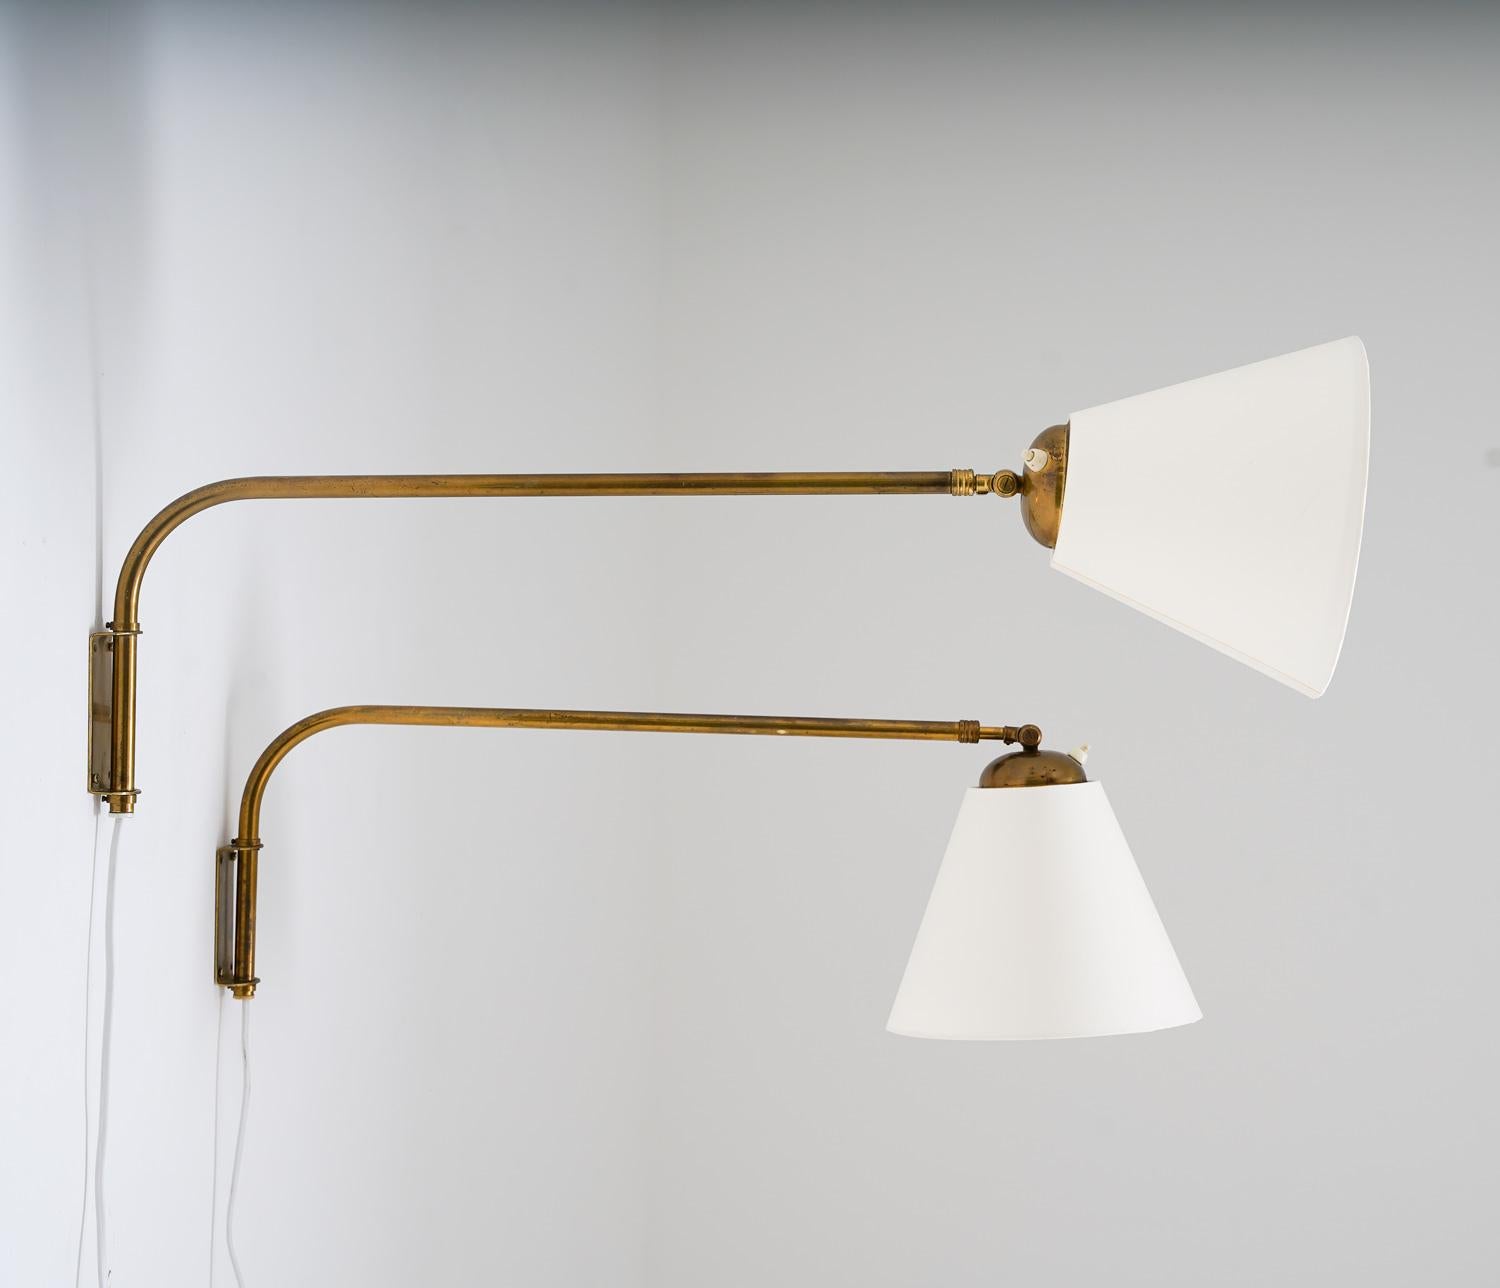 These beautiful wall lamps were manufactured in Sweden in the 1940s by EAE. They consist of an extendable brass rod, which holds the adjustable shade. The length of the rod can be adjusted between 60 and 100cm (23